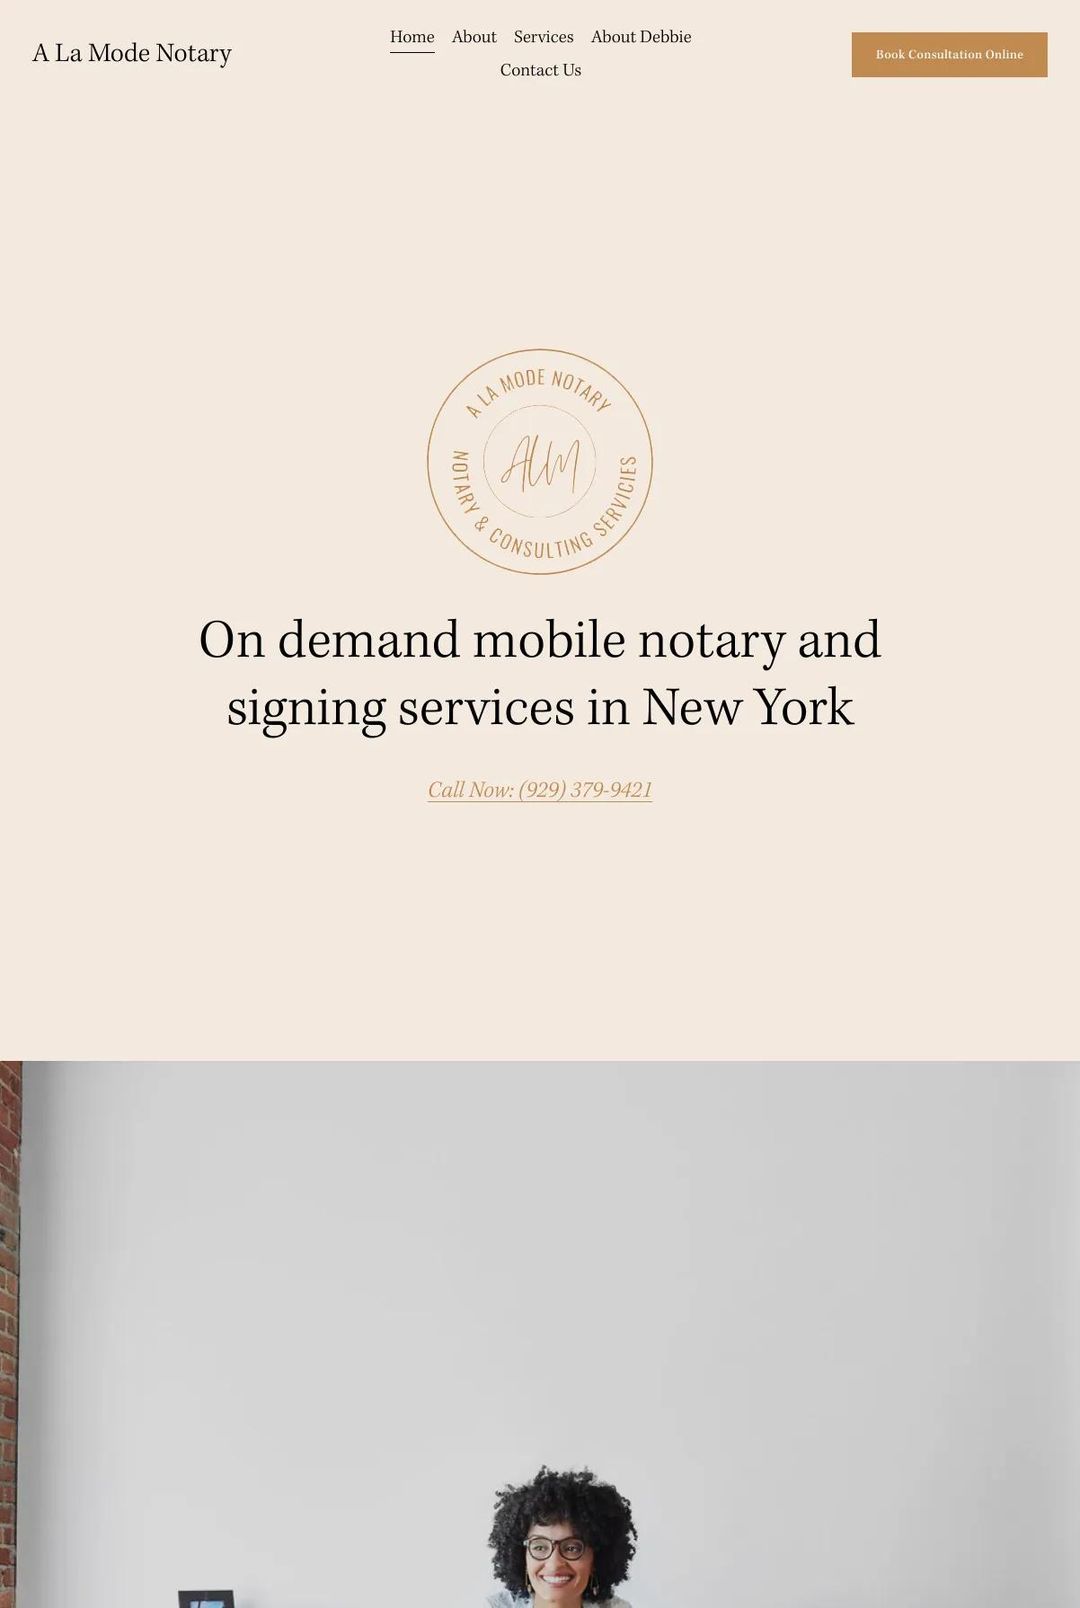 Screenshot 1 of A La Mode Notary (Example Squarespace Notary Website)